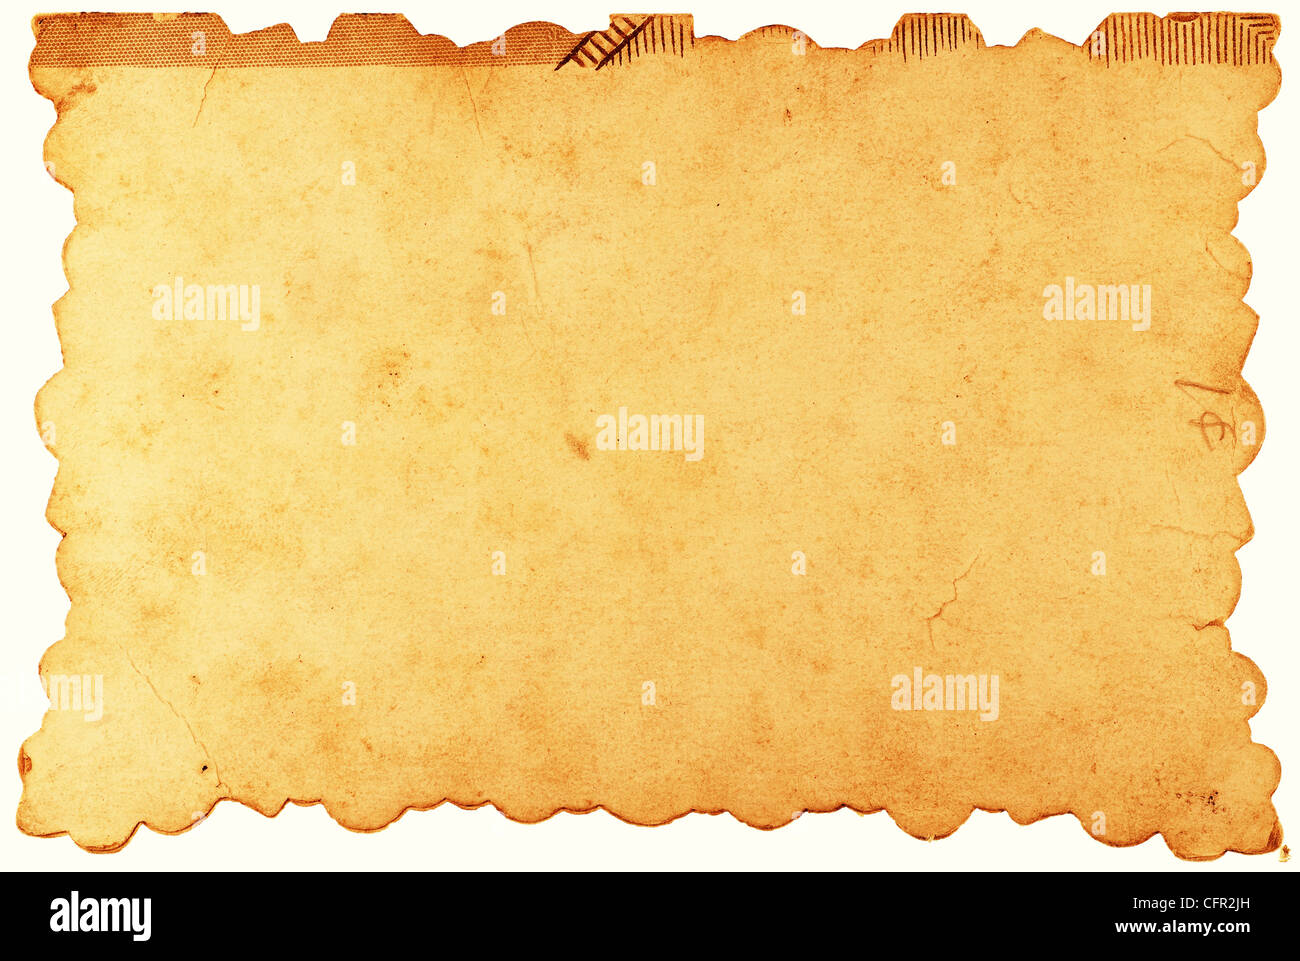 Blank vintage piece of paper with scalloped edges isolated on white Stock Photo